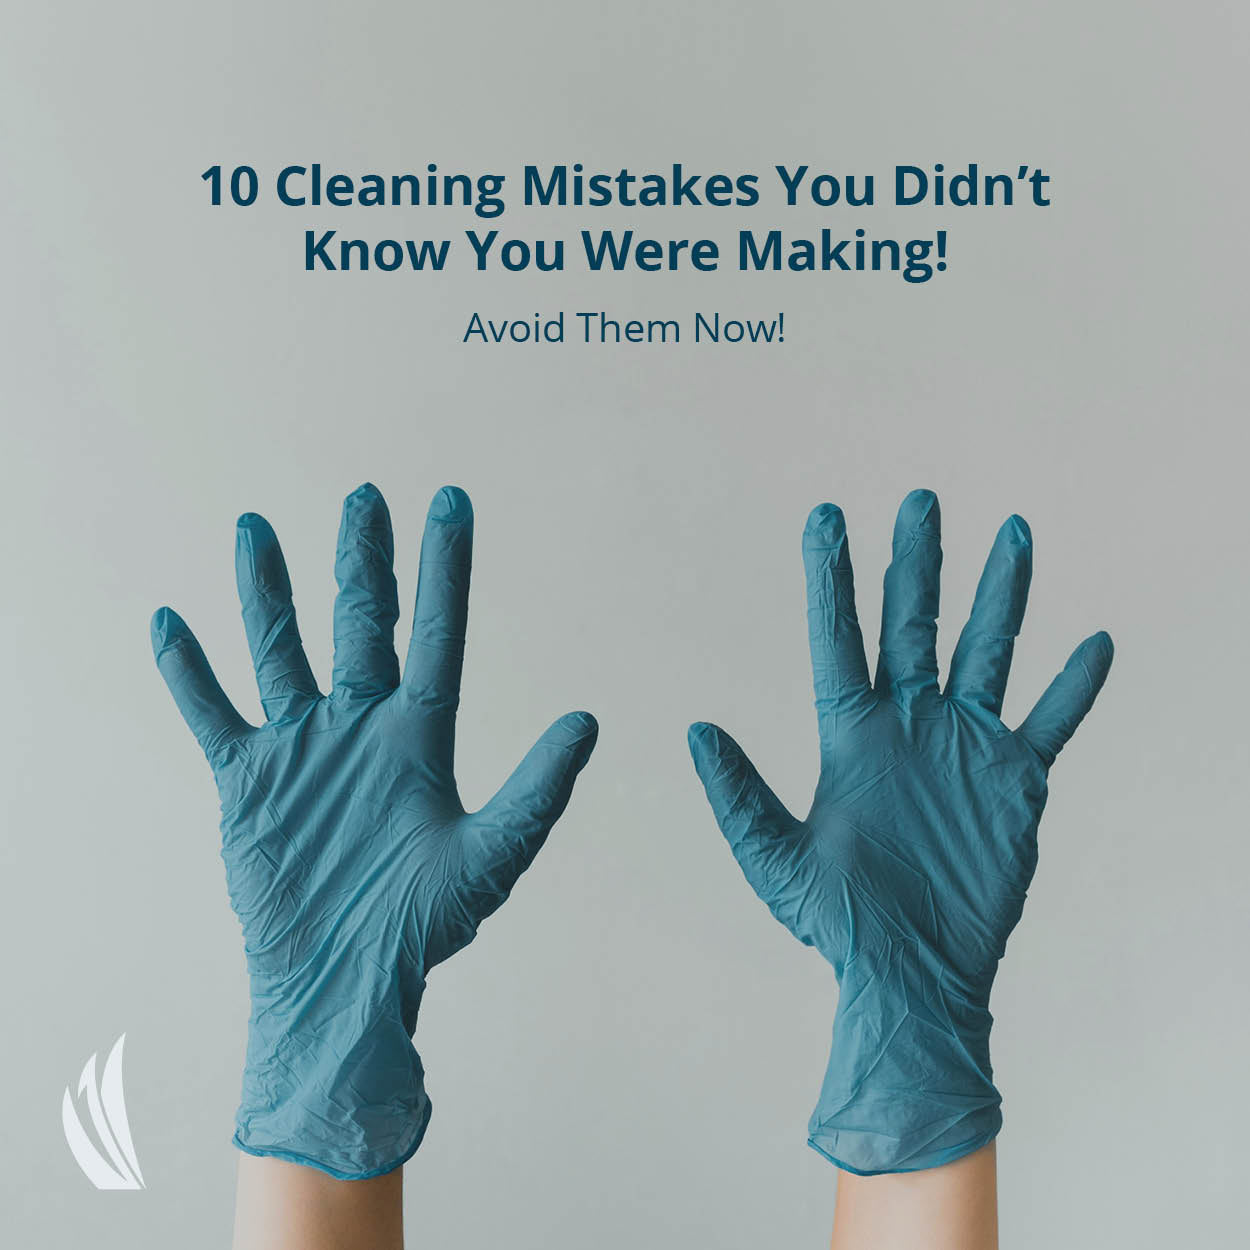 10 Cleaning Mistakes You Didn't Know You Were Making!